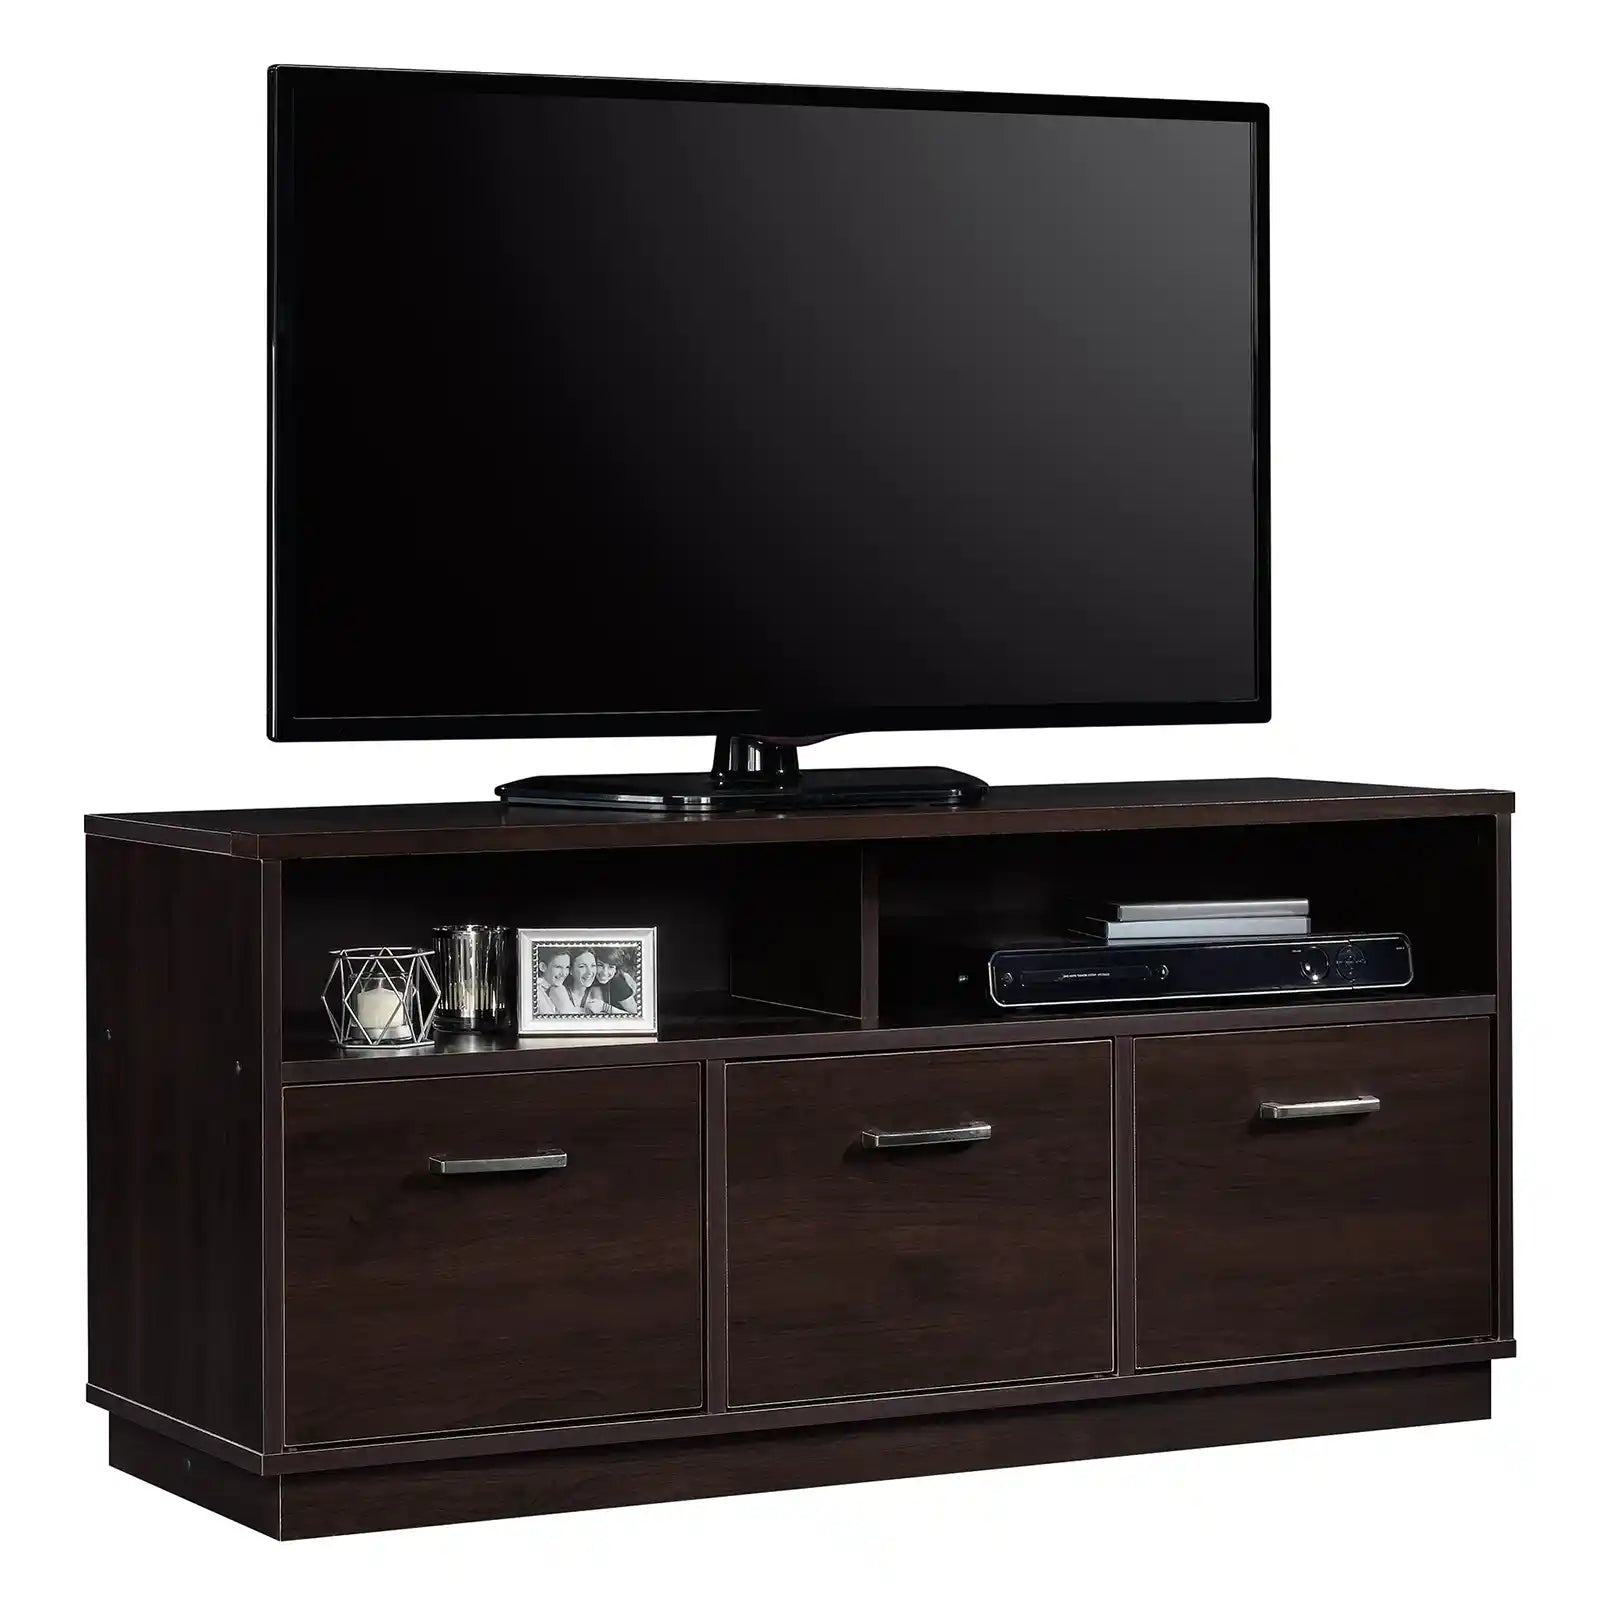 3-Door TV Stand Console for TVs up to 50"